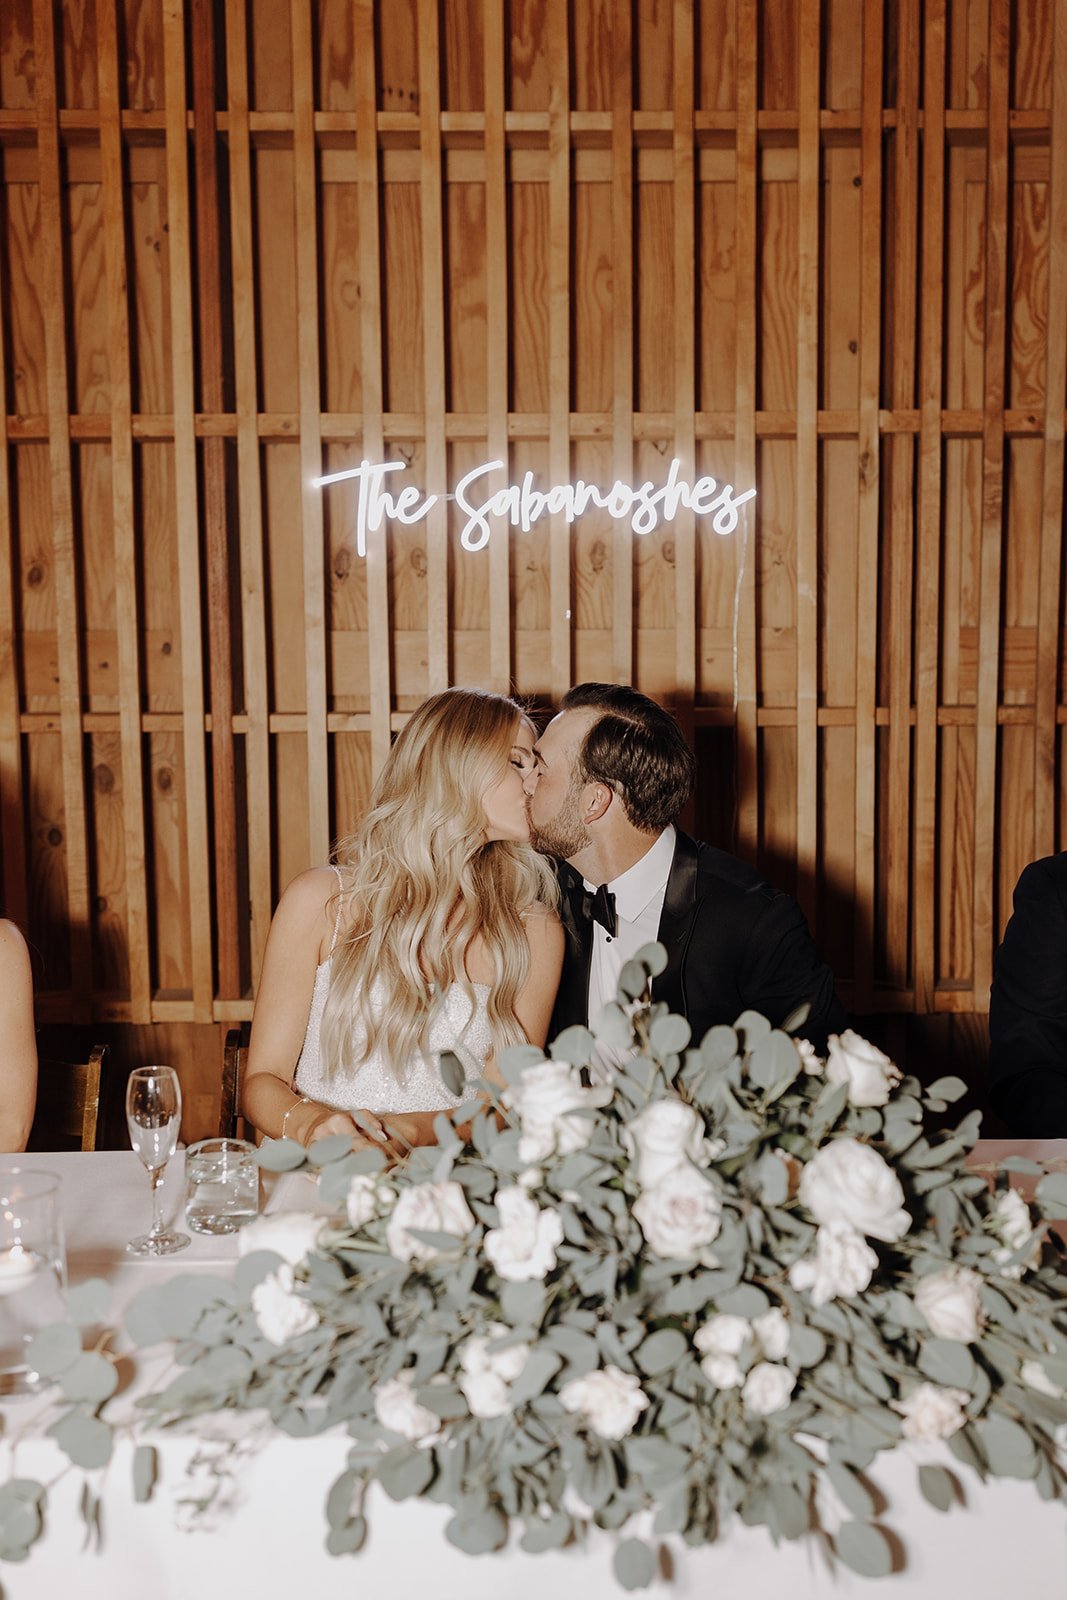 Bride and groom kiss at their reception tabled with neon sign in the background